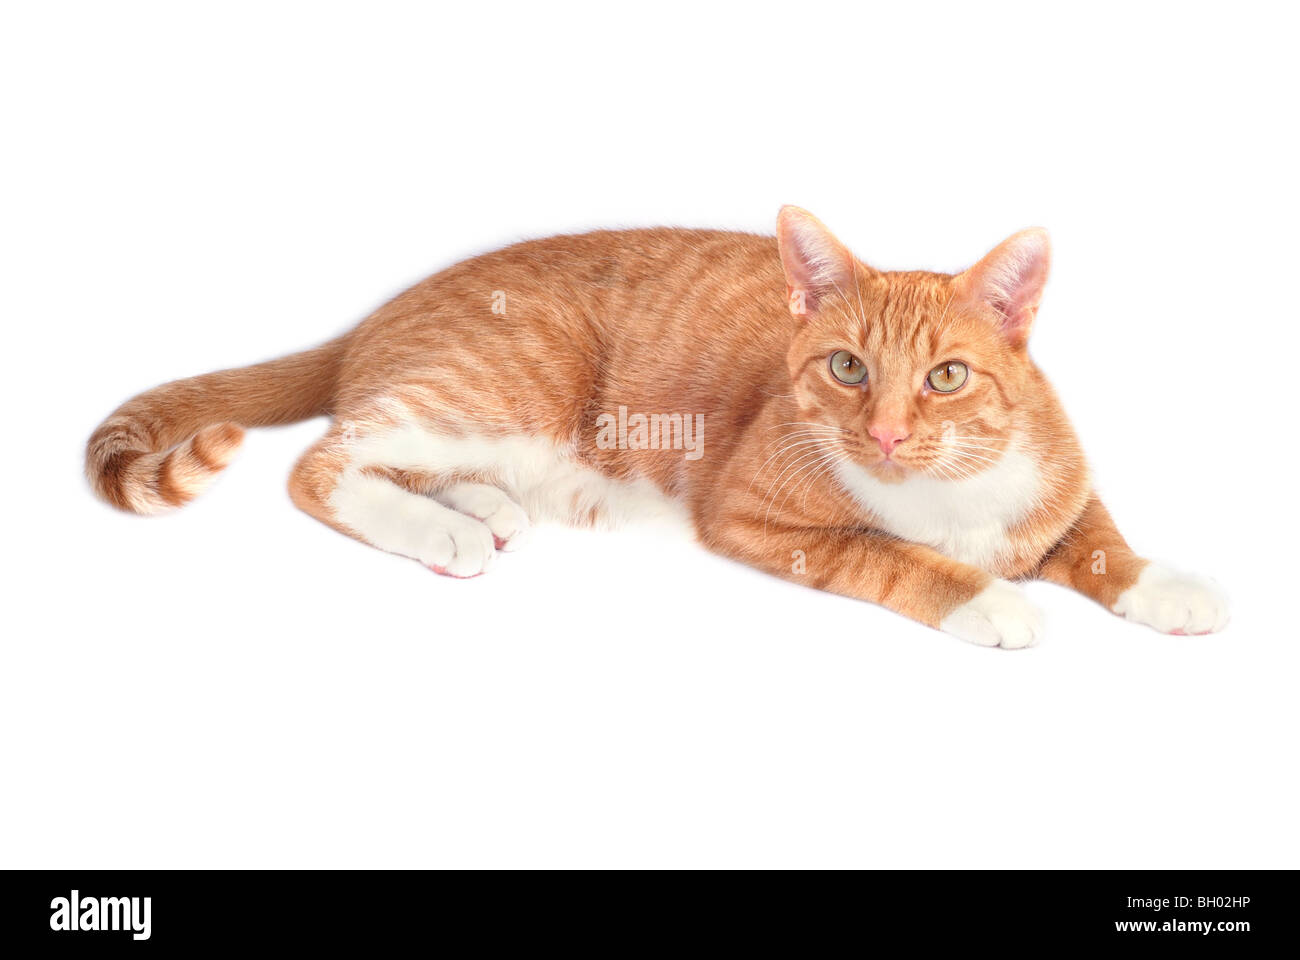 Red cat on a white background Stock Photo